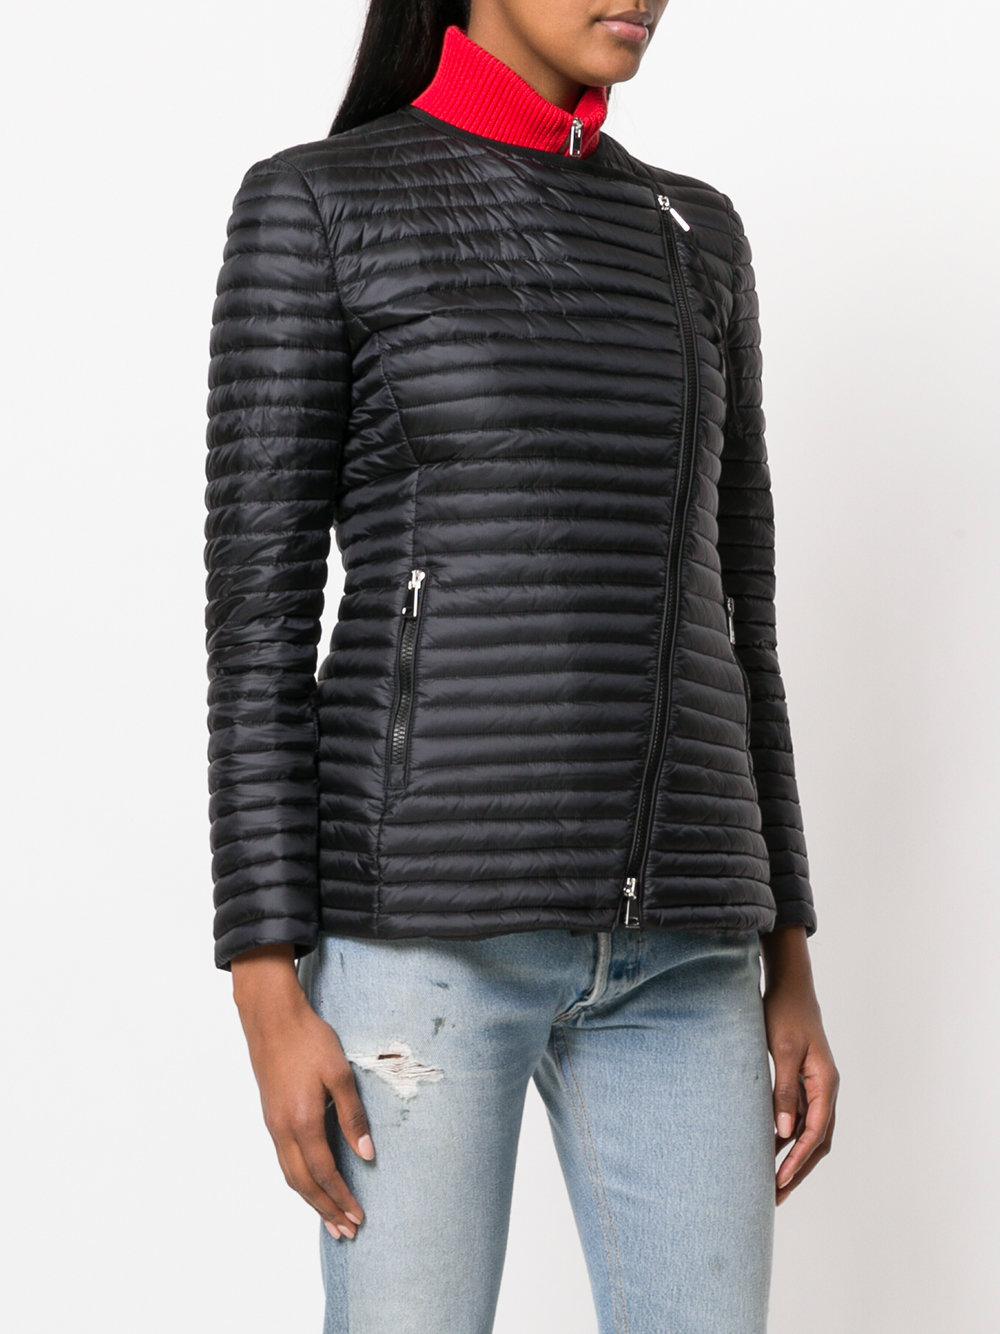 Moncler Axinite Jacket in Black - Lyst